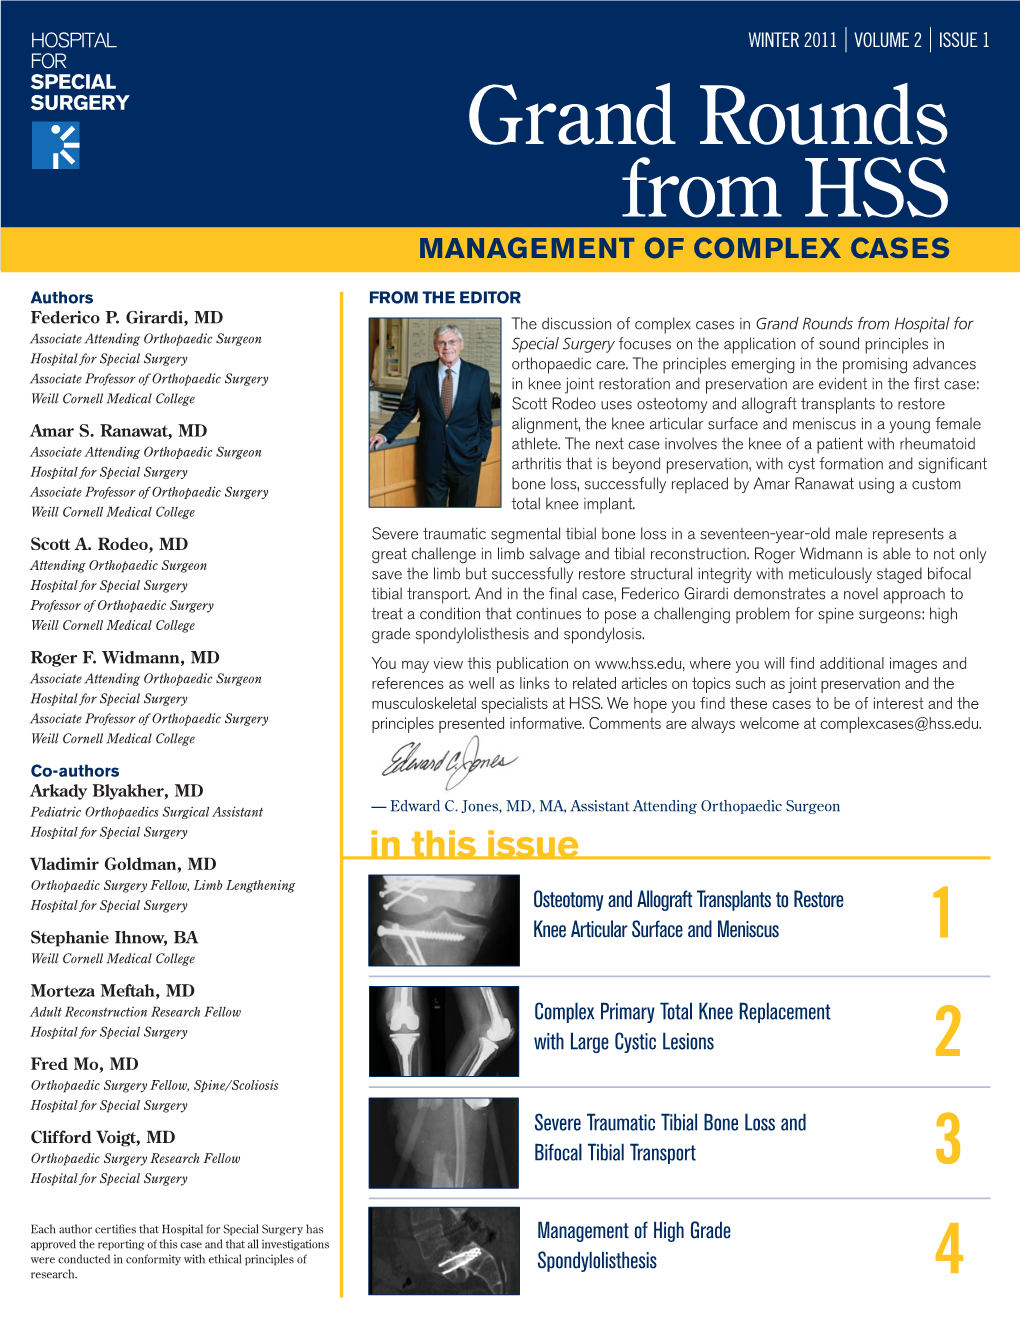 Grand Rounds from HSS Management of Complex Cases